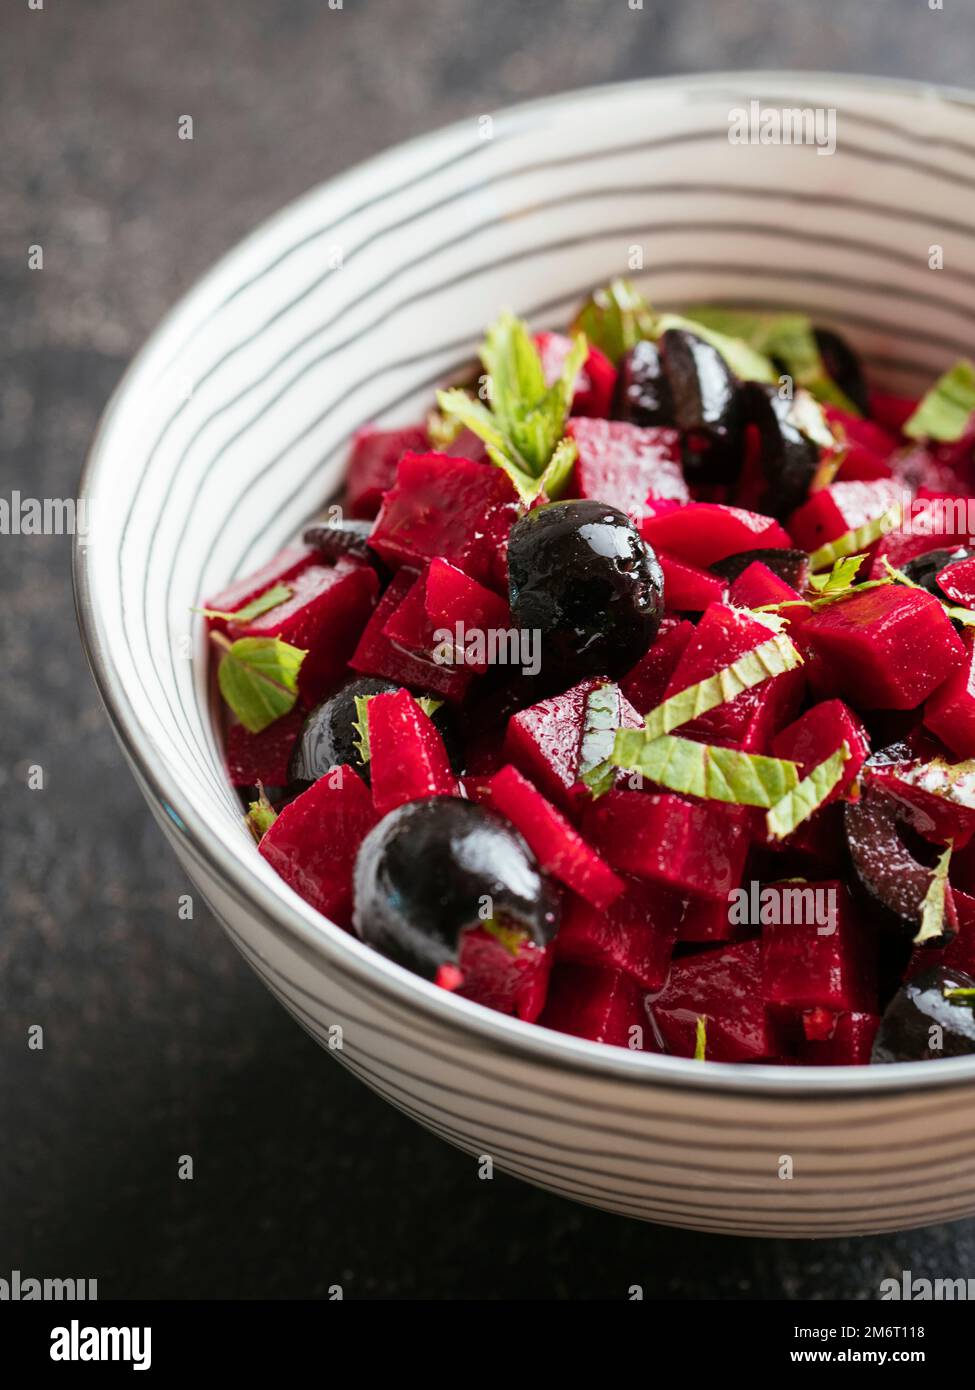 Bowl with a home made beet salad with minted beets, olives and fresh mint leaves. Stock Photo